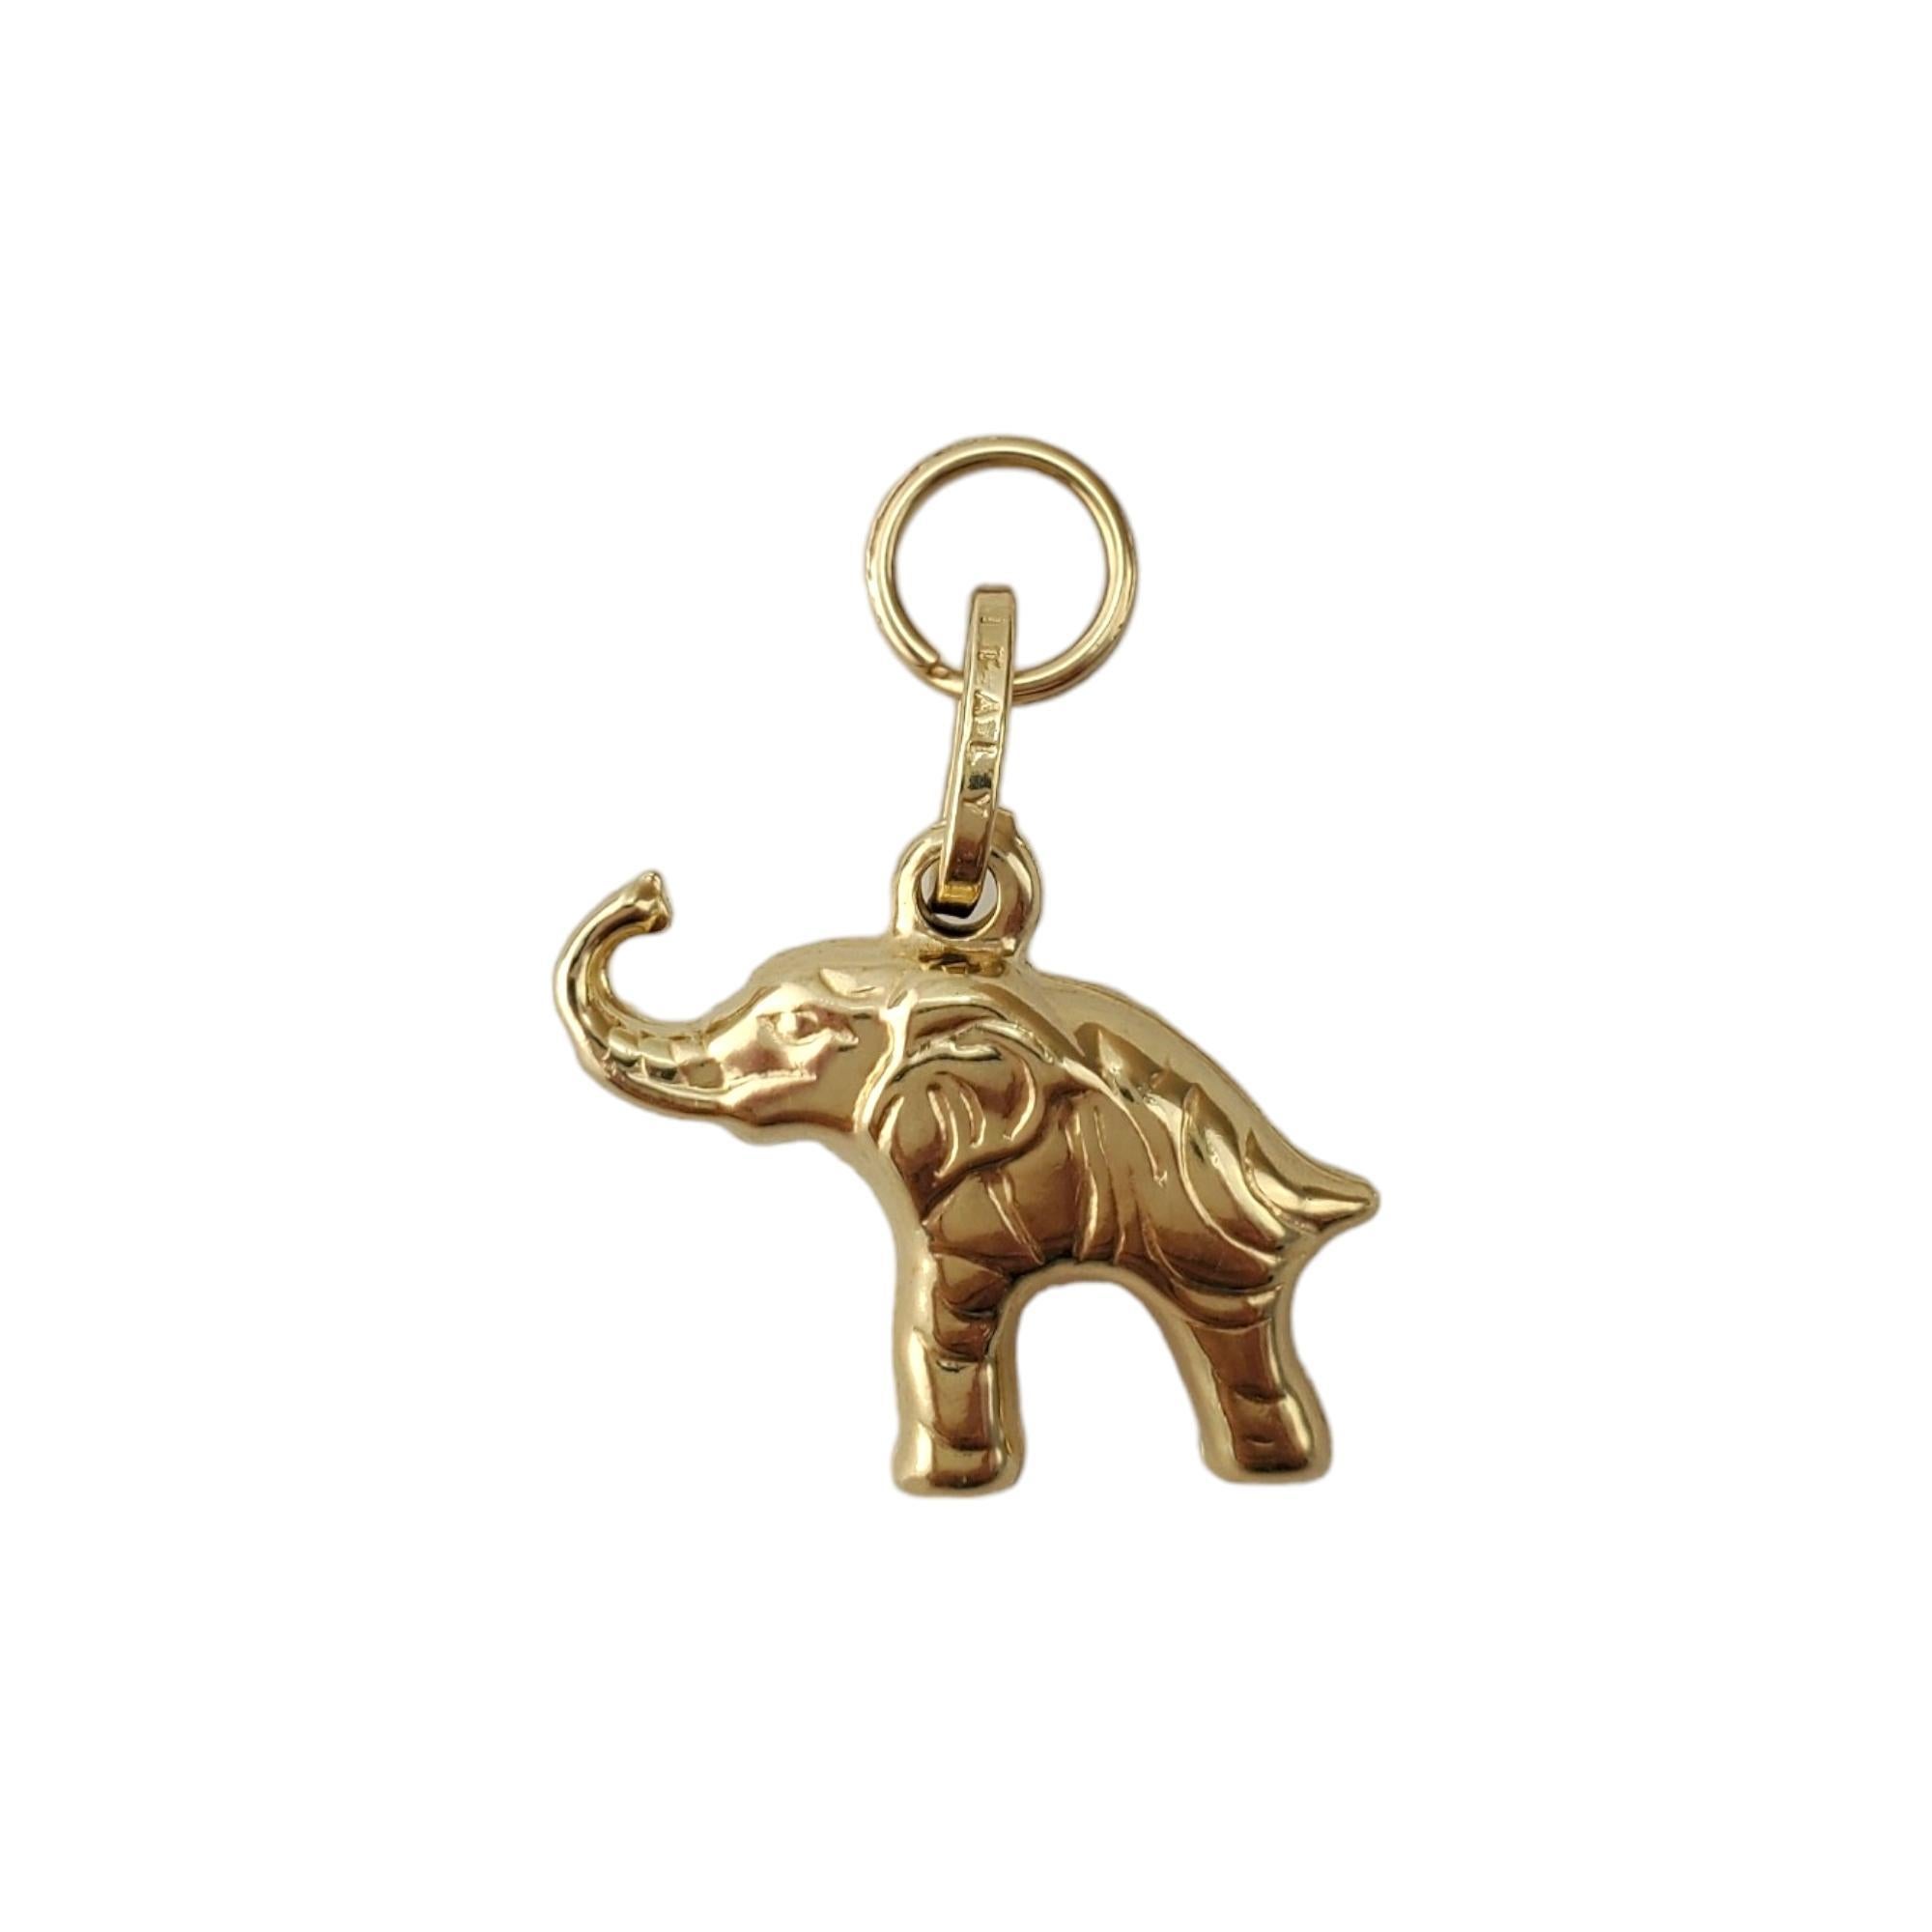 14K Yellow Gold Elephant Charm 

This adorable elephant charm in 14K yellow gold is the perfect addition to any bracelet.

Hallmark: 585 ITALY

Weight: 1.03 dwt/ 1.59 g

Length w/ bail: 26.67 mm

Size: 15.41 mm X 18.46 mm X 5.08 mm

Very good